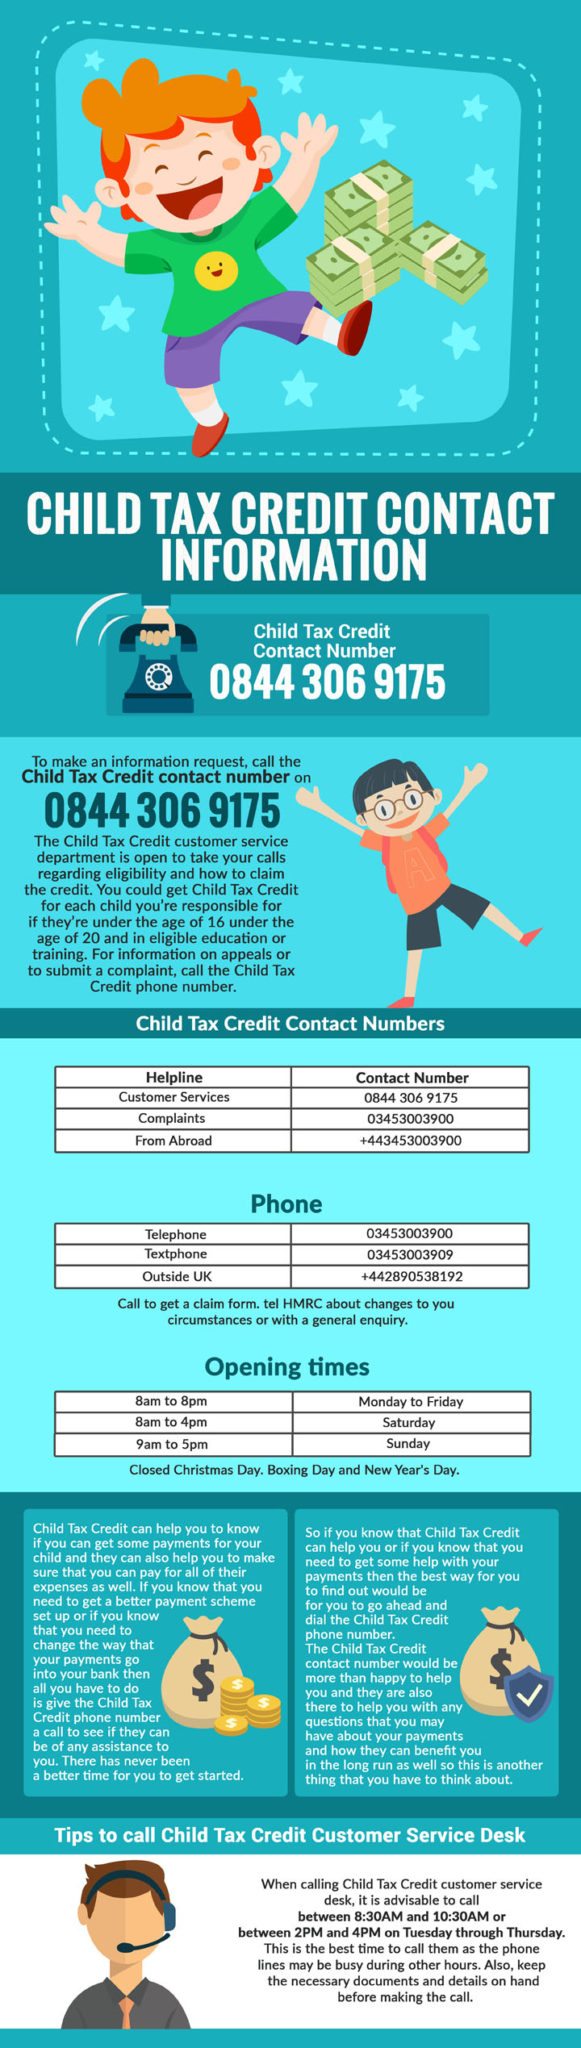 child-tax-credit-relevant-helpline-number-call-0844-306-9175